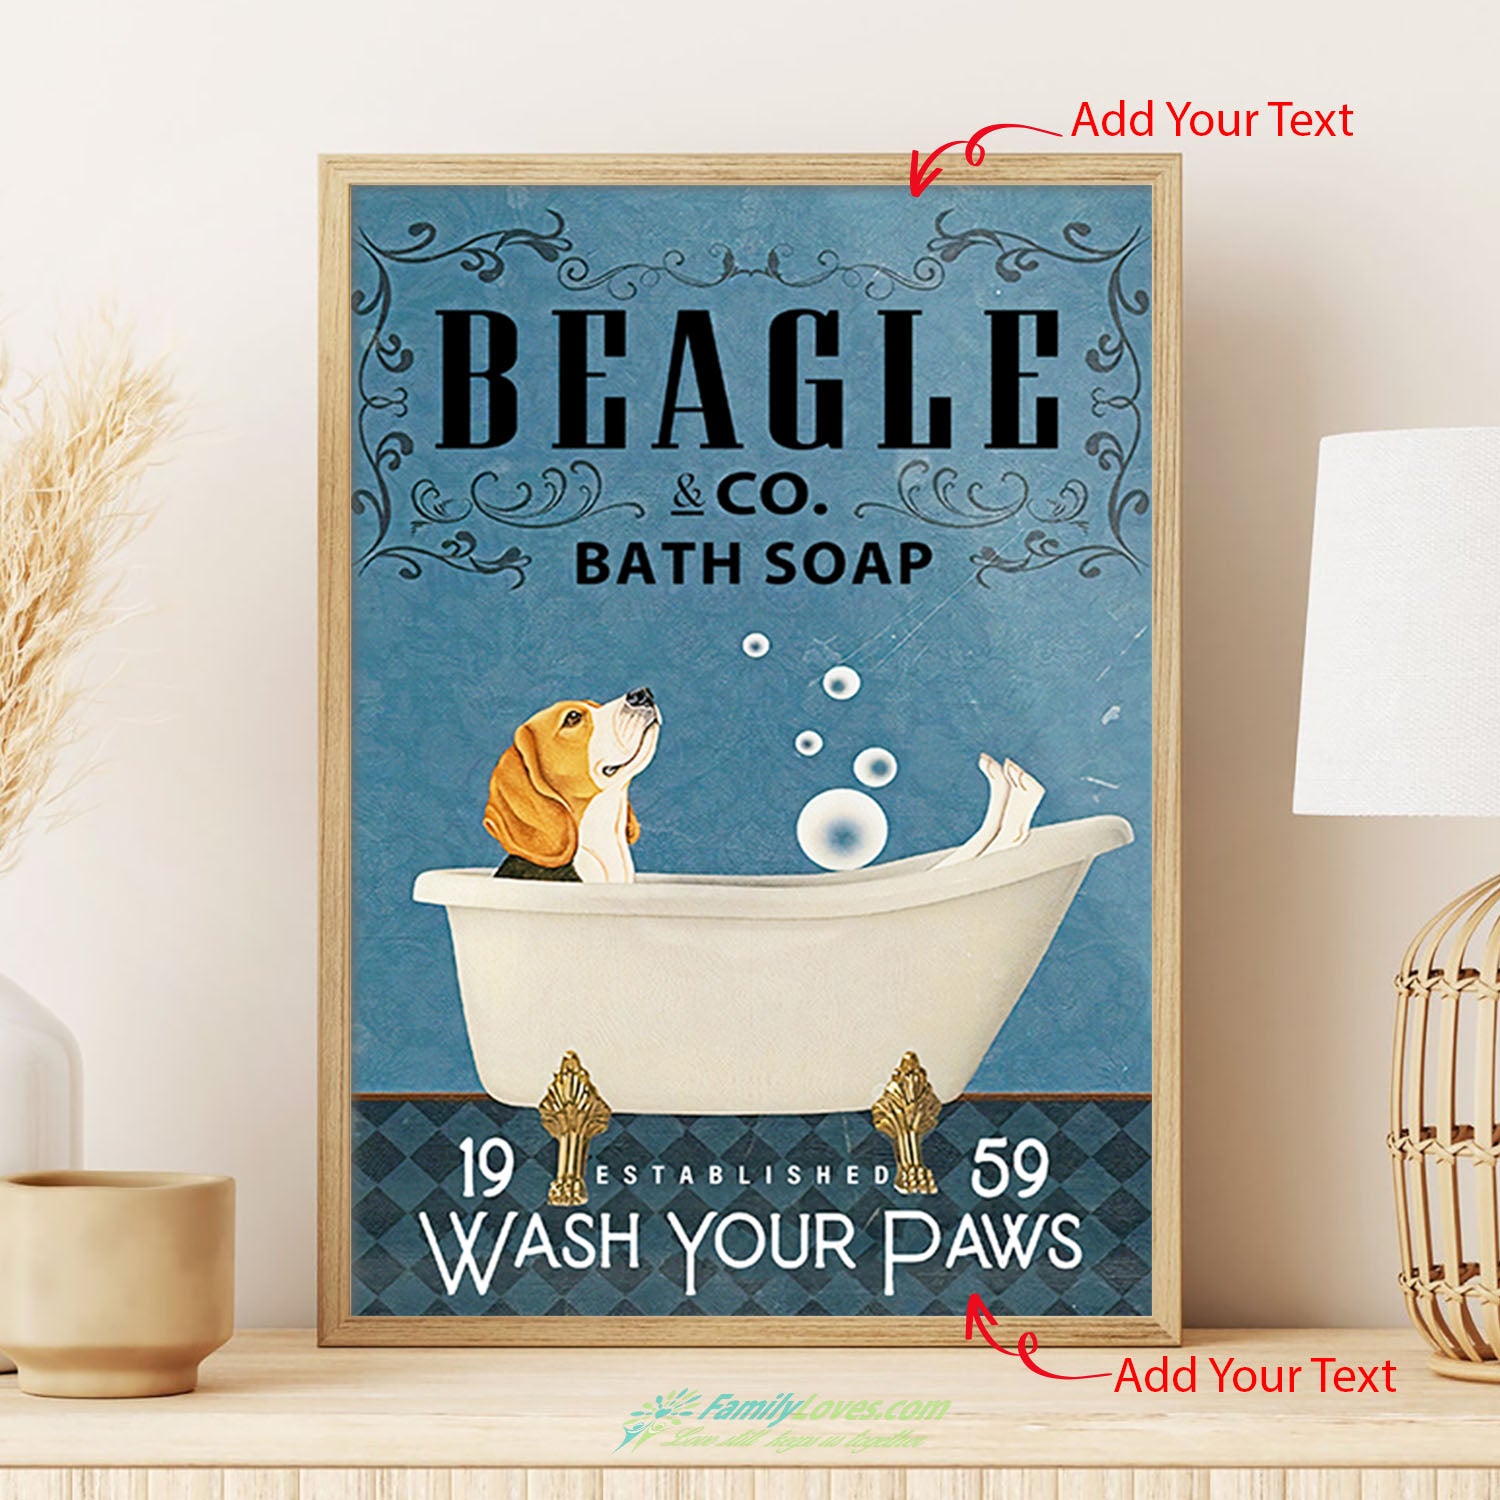 Beagle Co Bath Soap Wash Your Paws Wall Canvas Art Poster Holder All Size 1